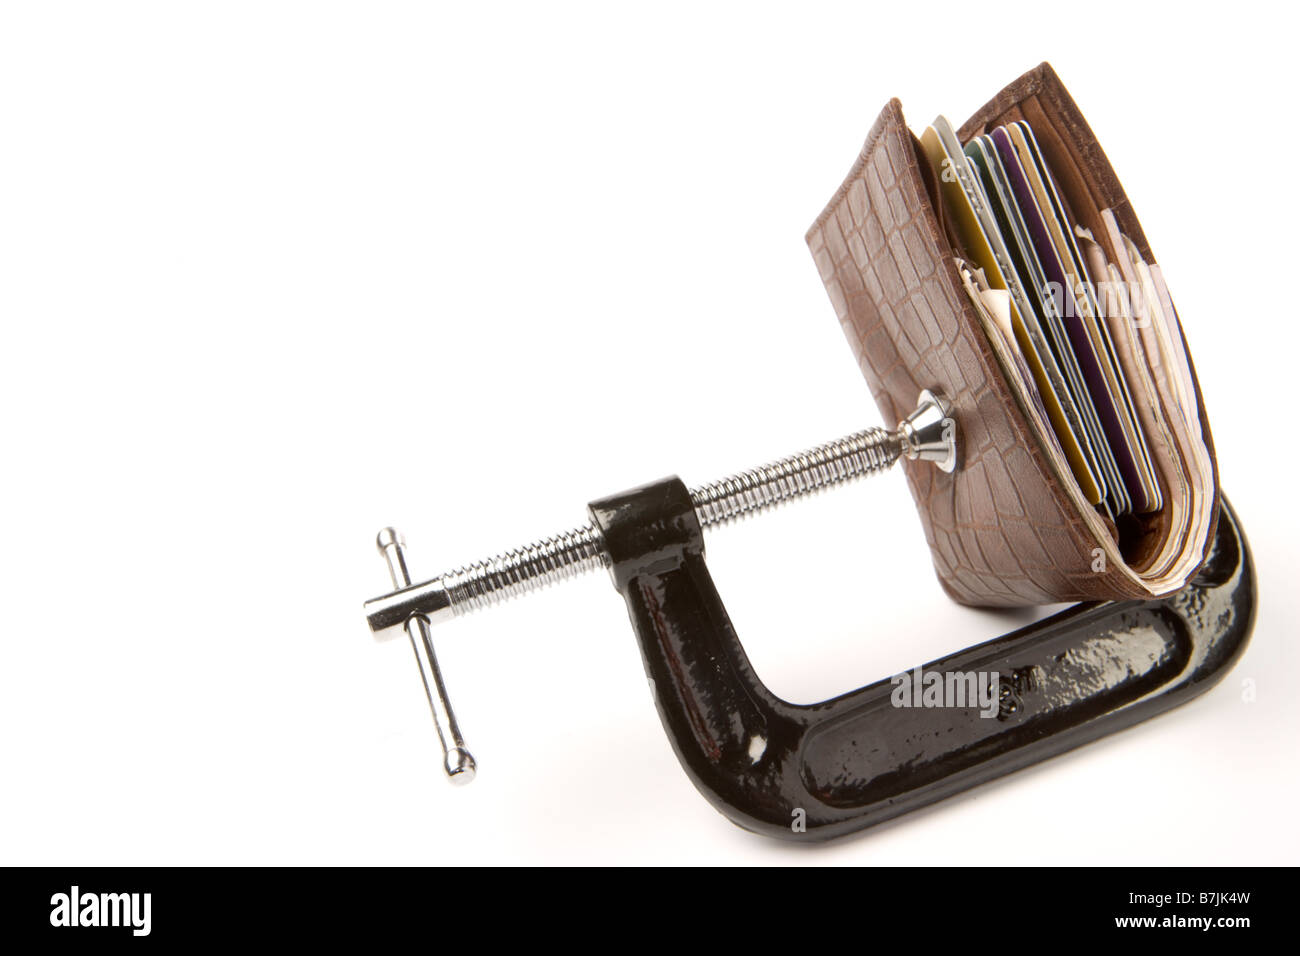 Leather Wallet Being Held In Clamp On White Background Stock Photo